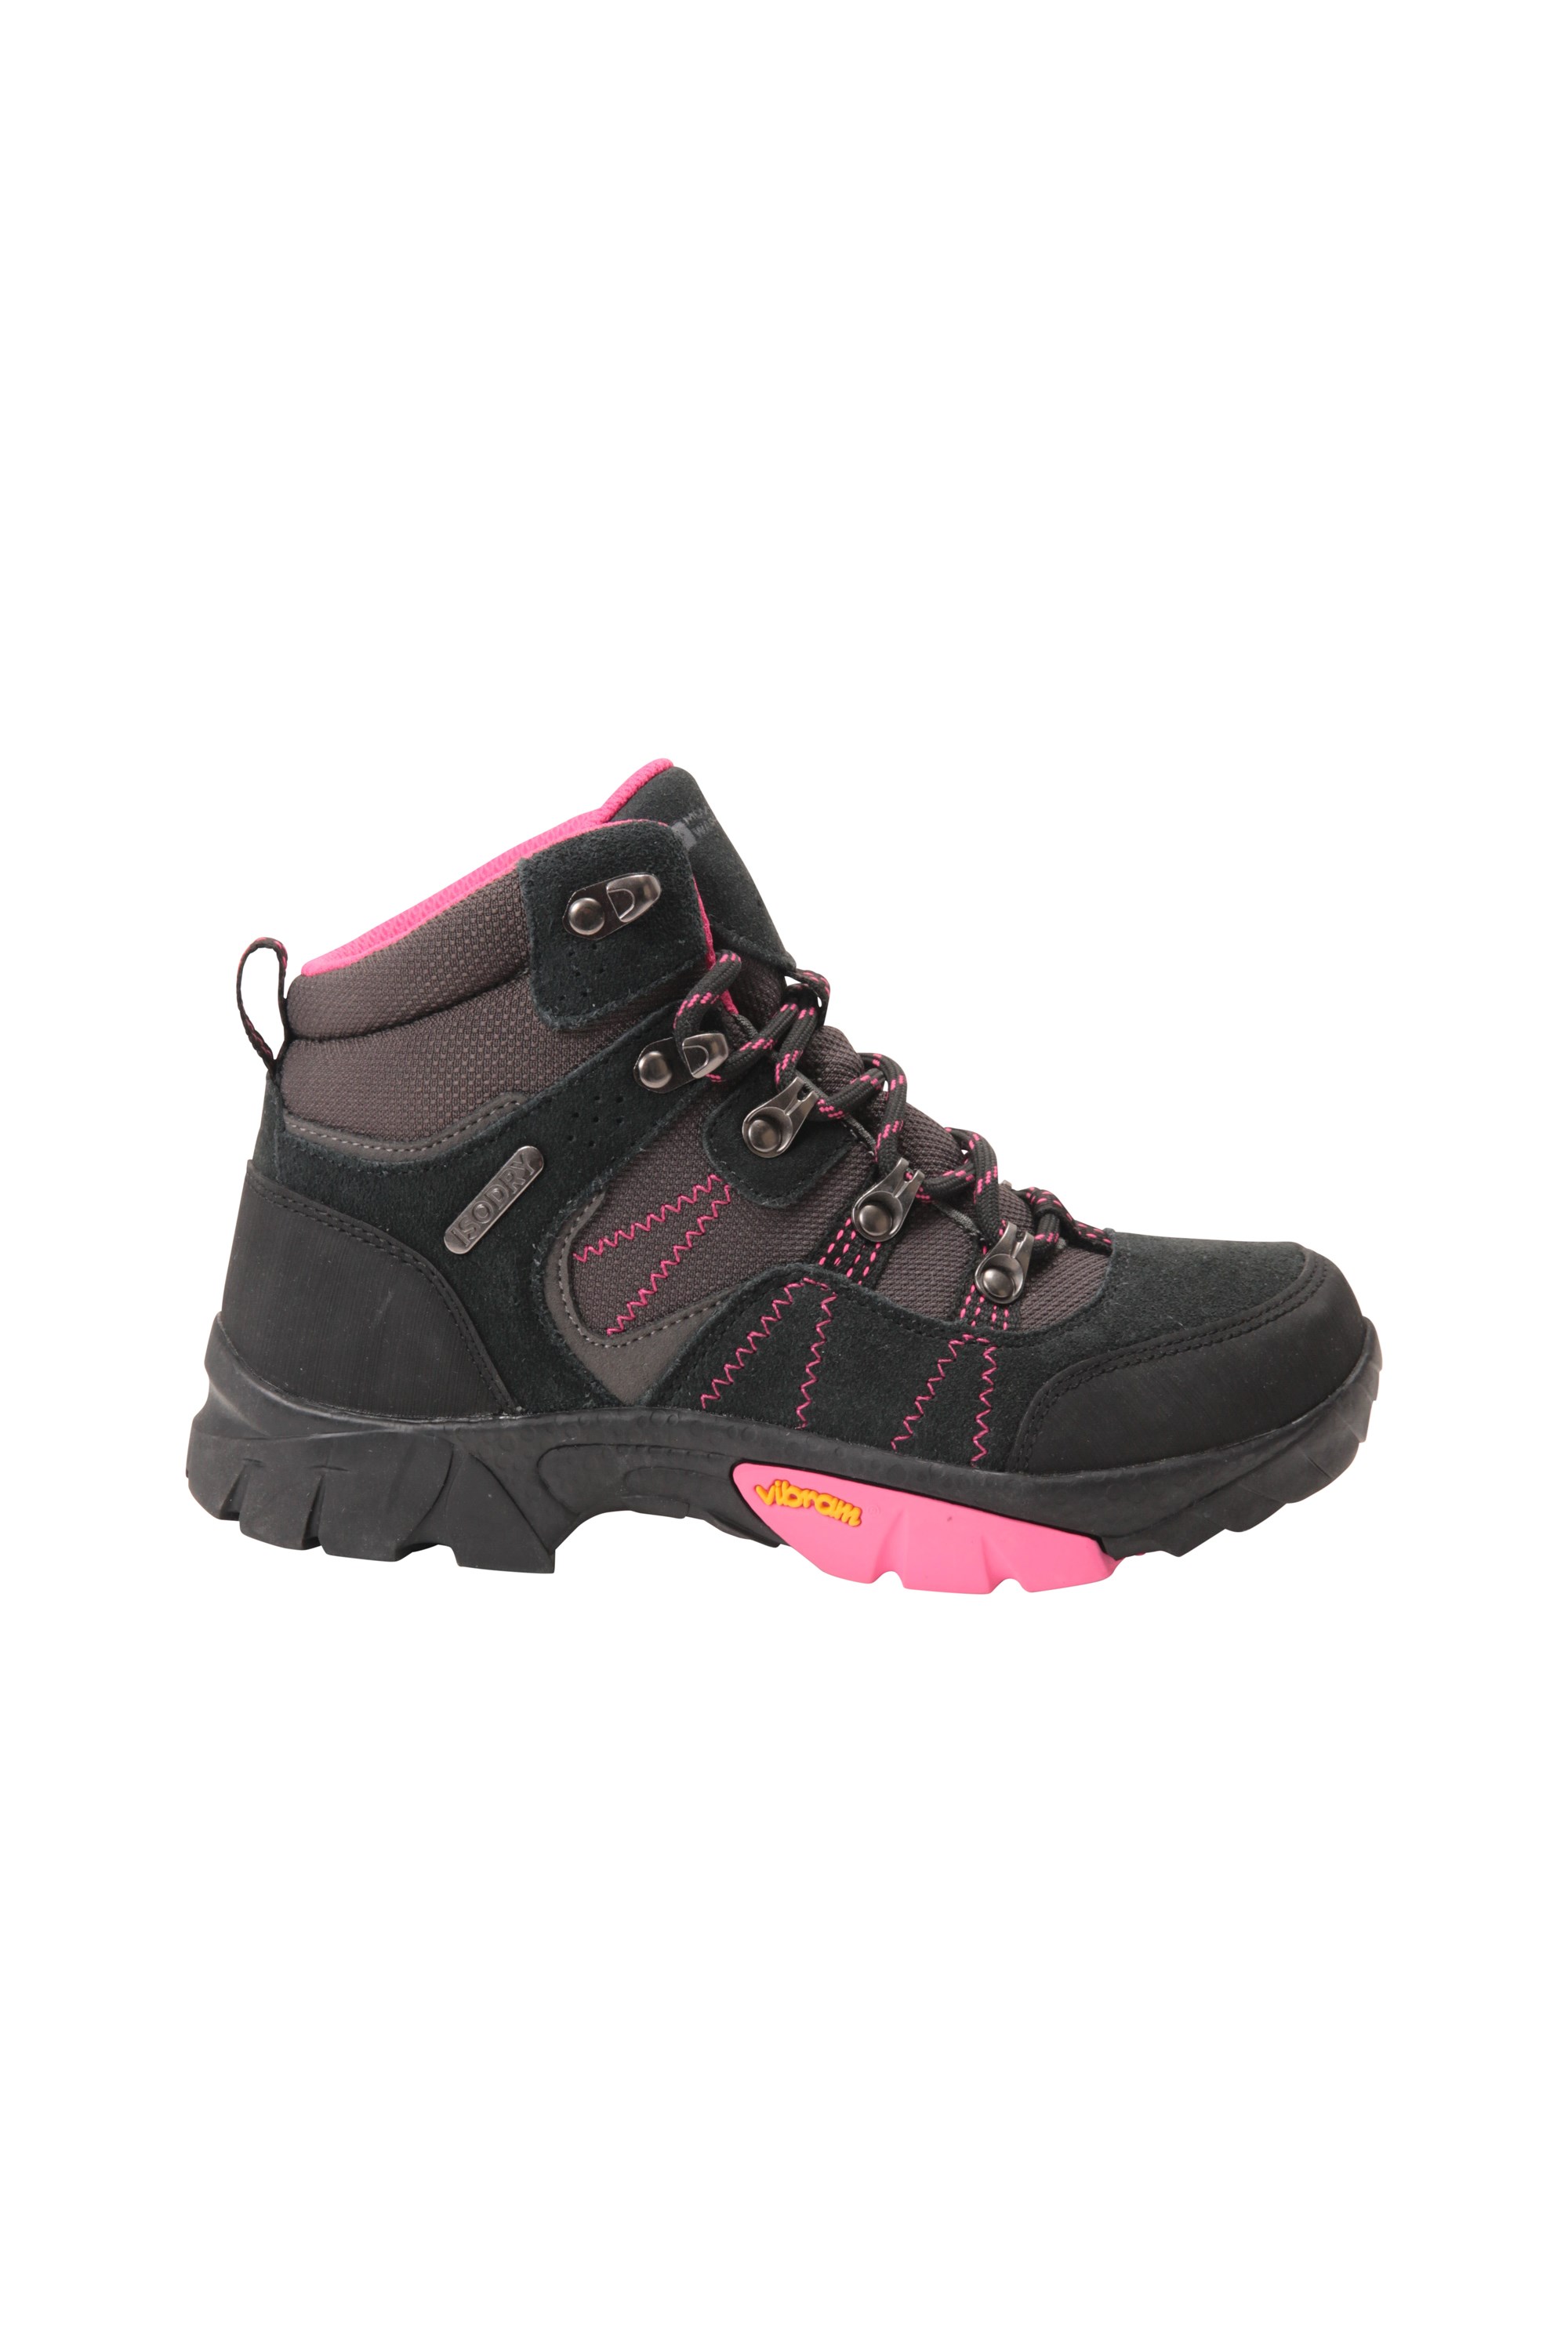 childrens walking boots go outdoors 